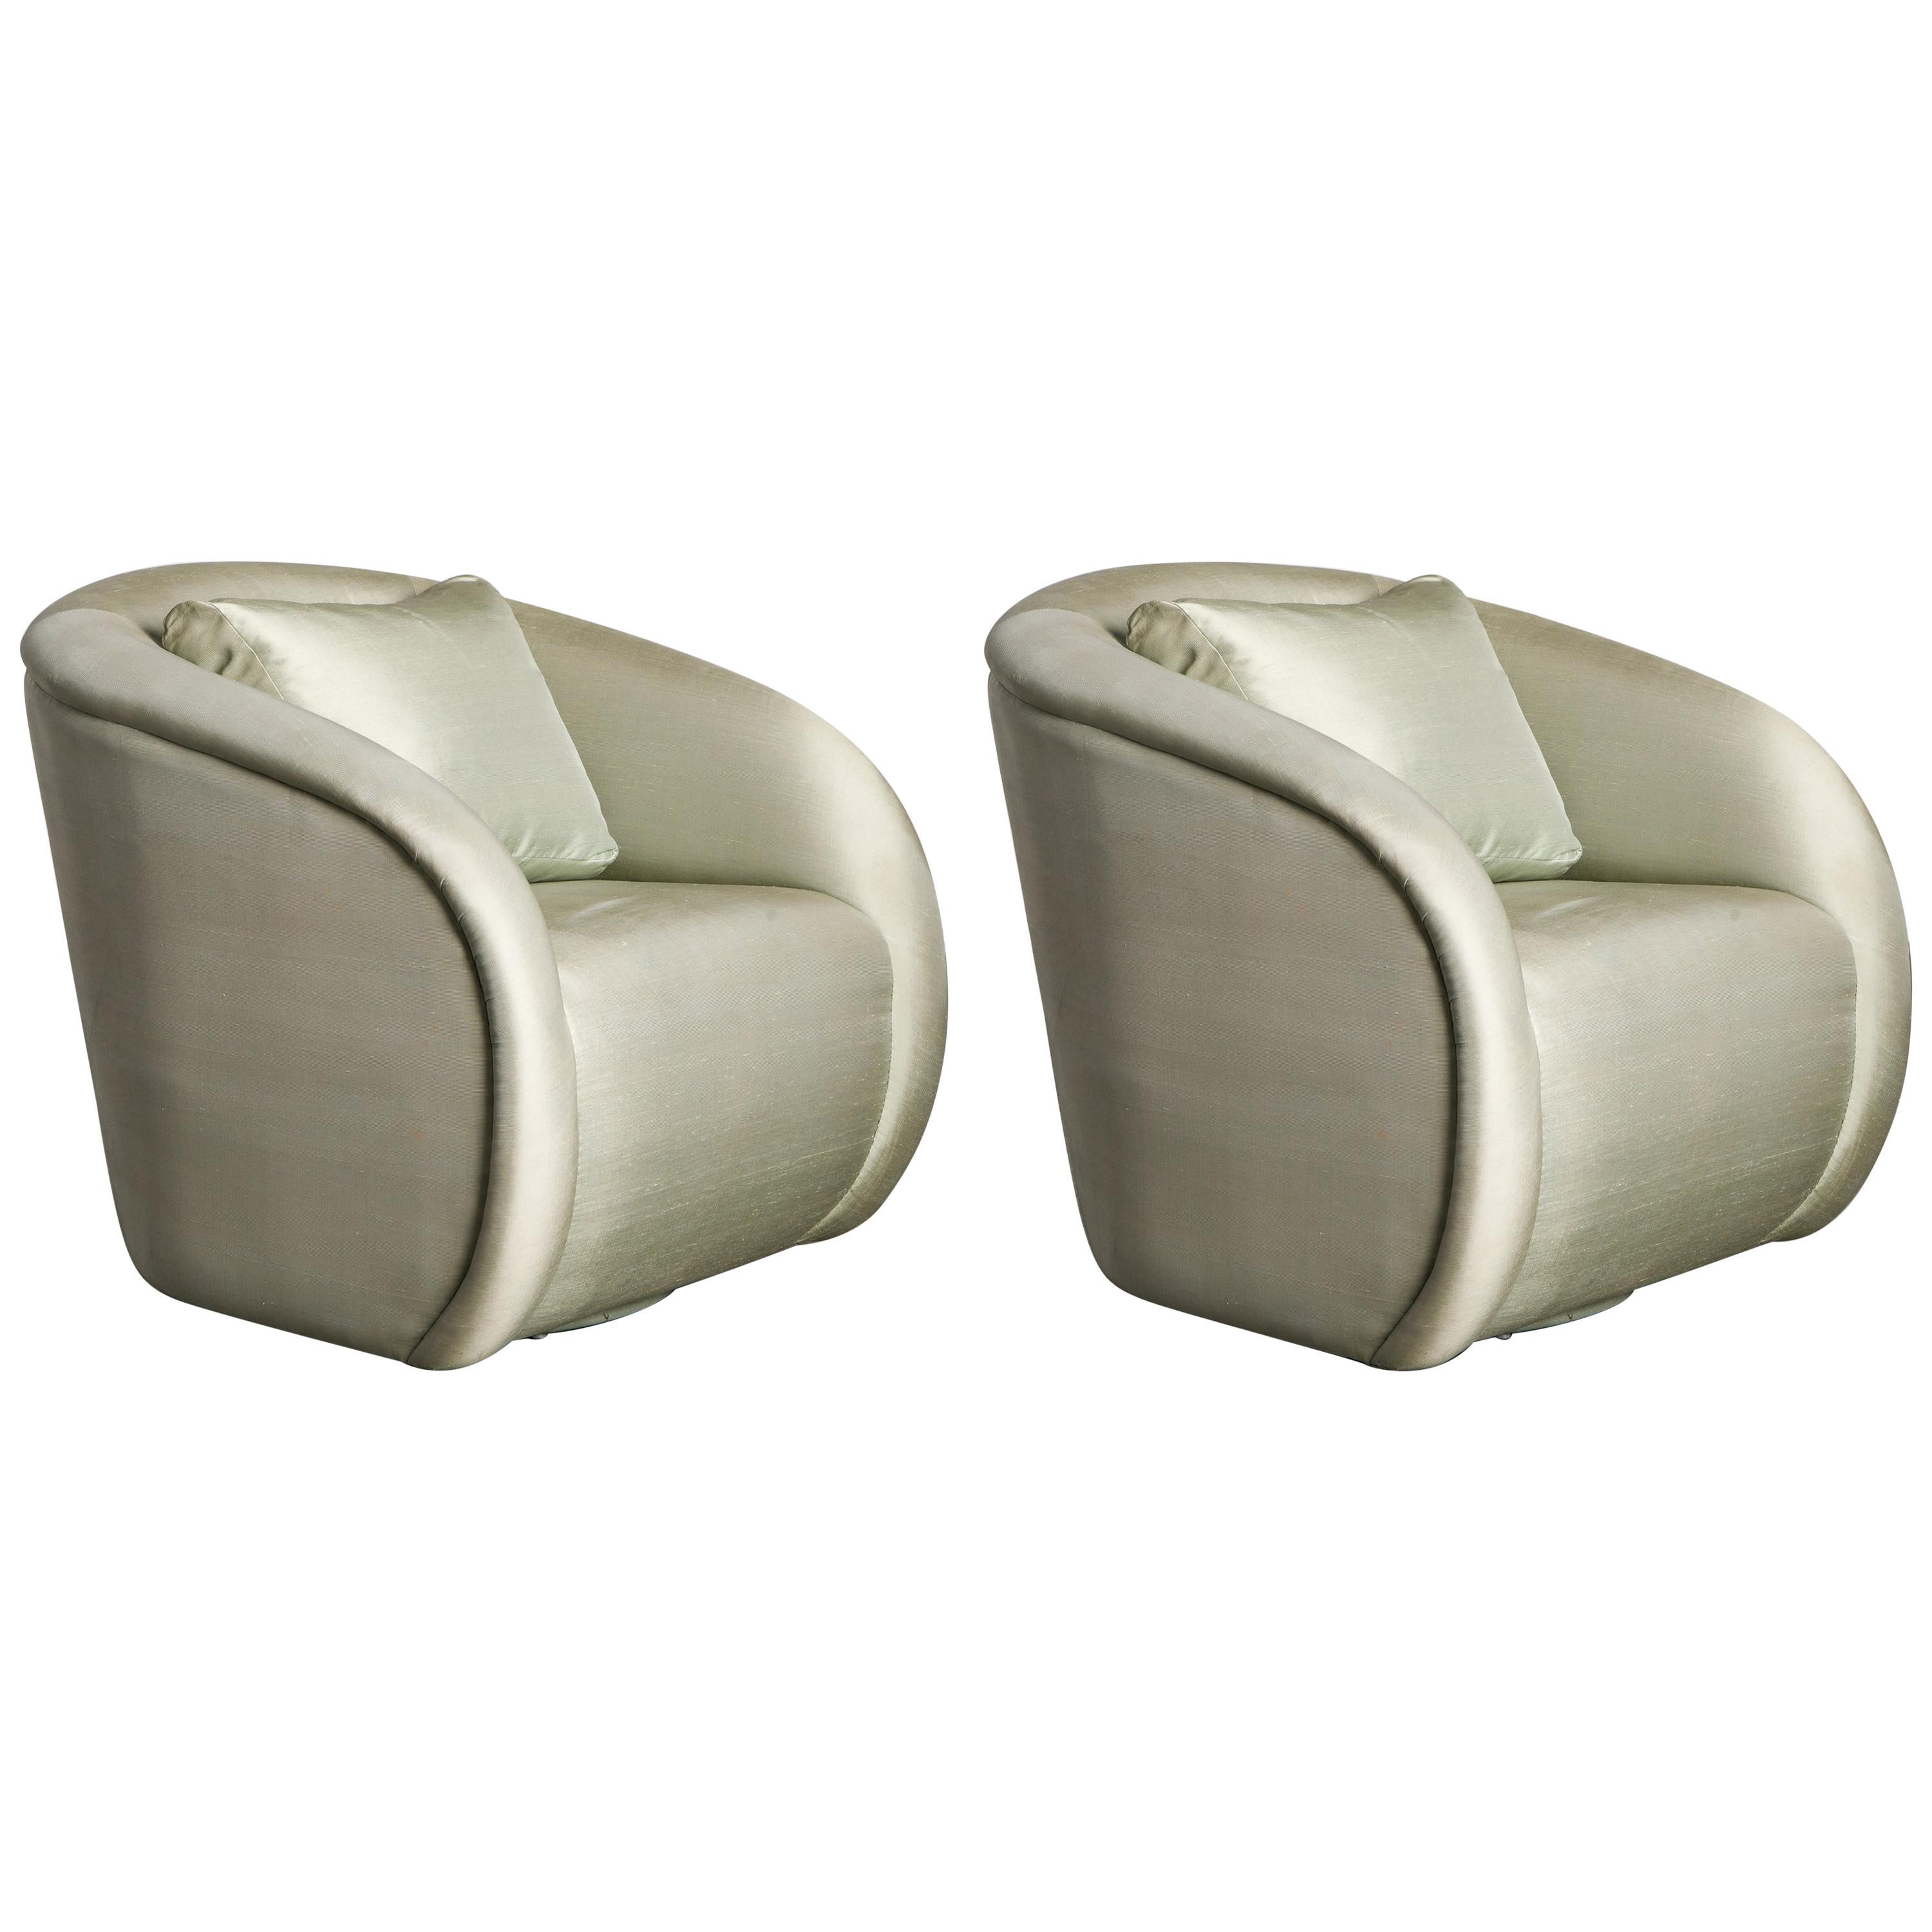 Pair of Swivel Chairs Attributed to Milo Baughman for Directional, circa 1980s